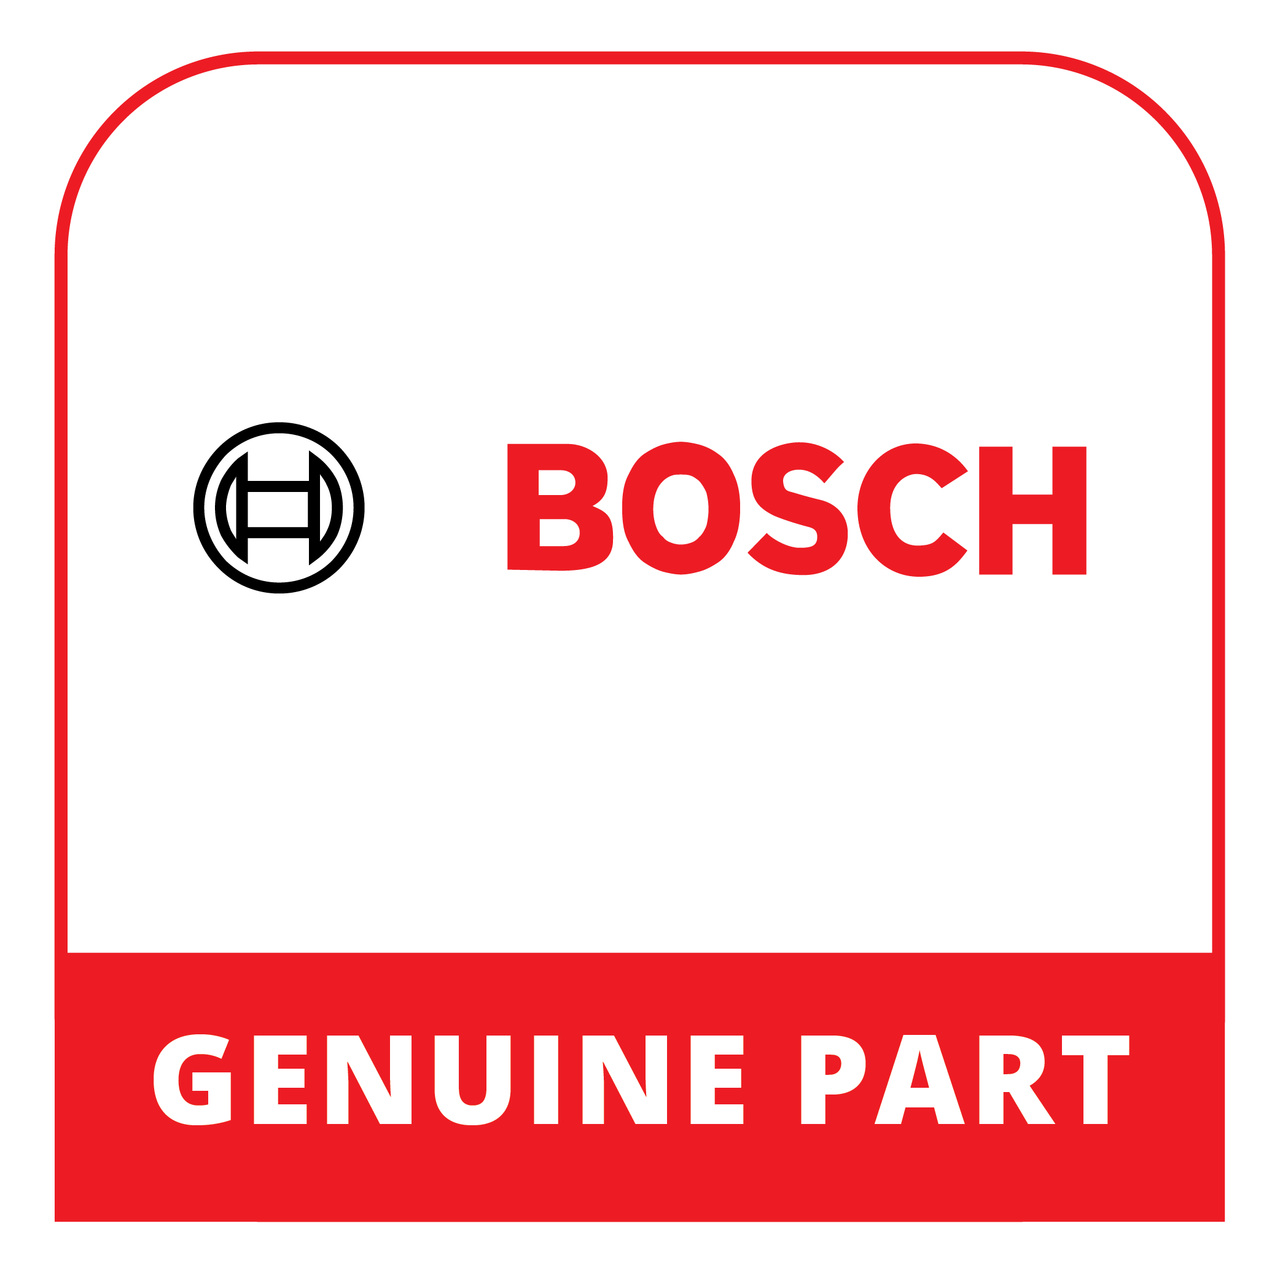 Bosch 00494784 - Template - Genuine Bosch (Thermador) Part